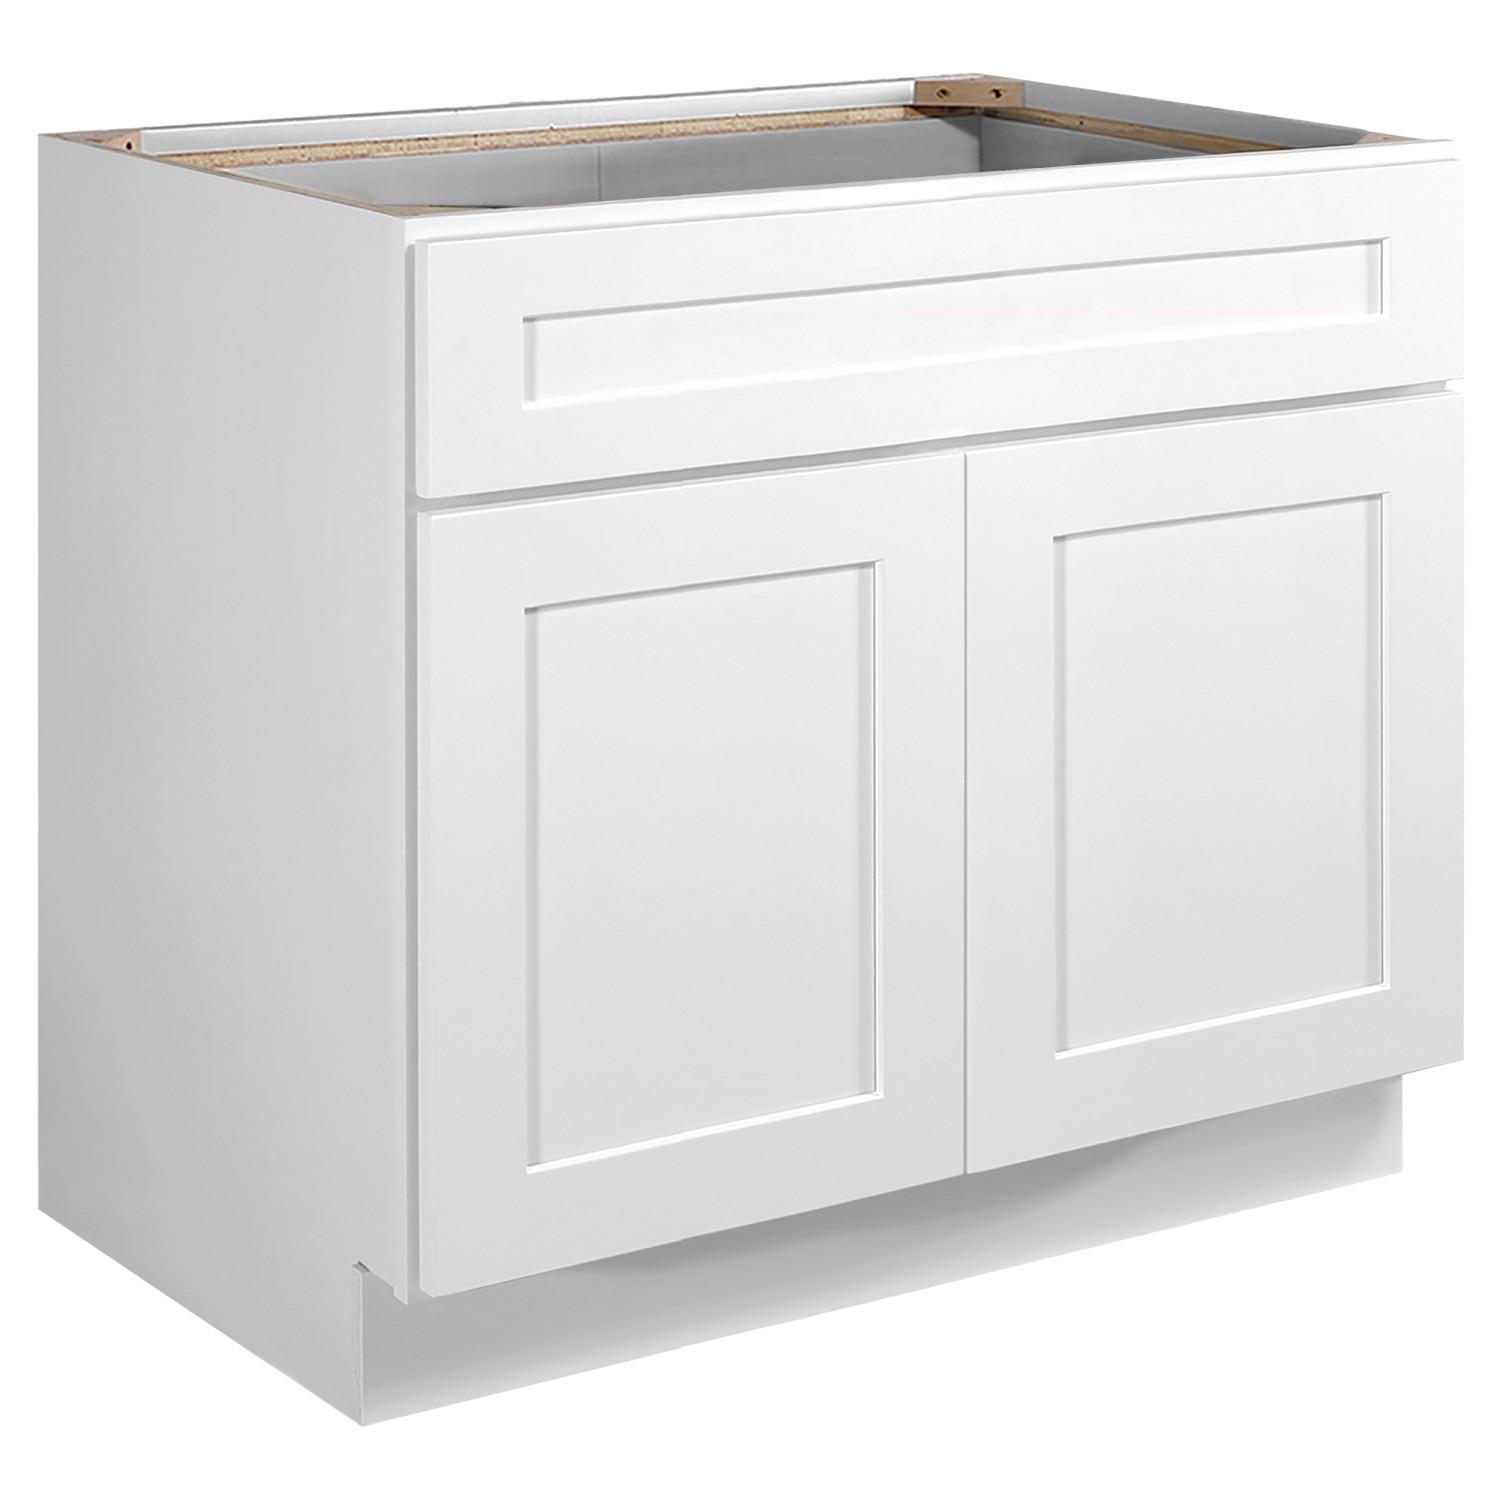 Brookings Sink Base Cabinet White 36 Inch Wide ǀ Kitchen ǀ Today's ...